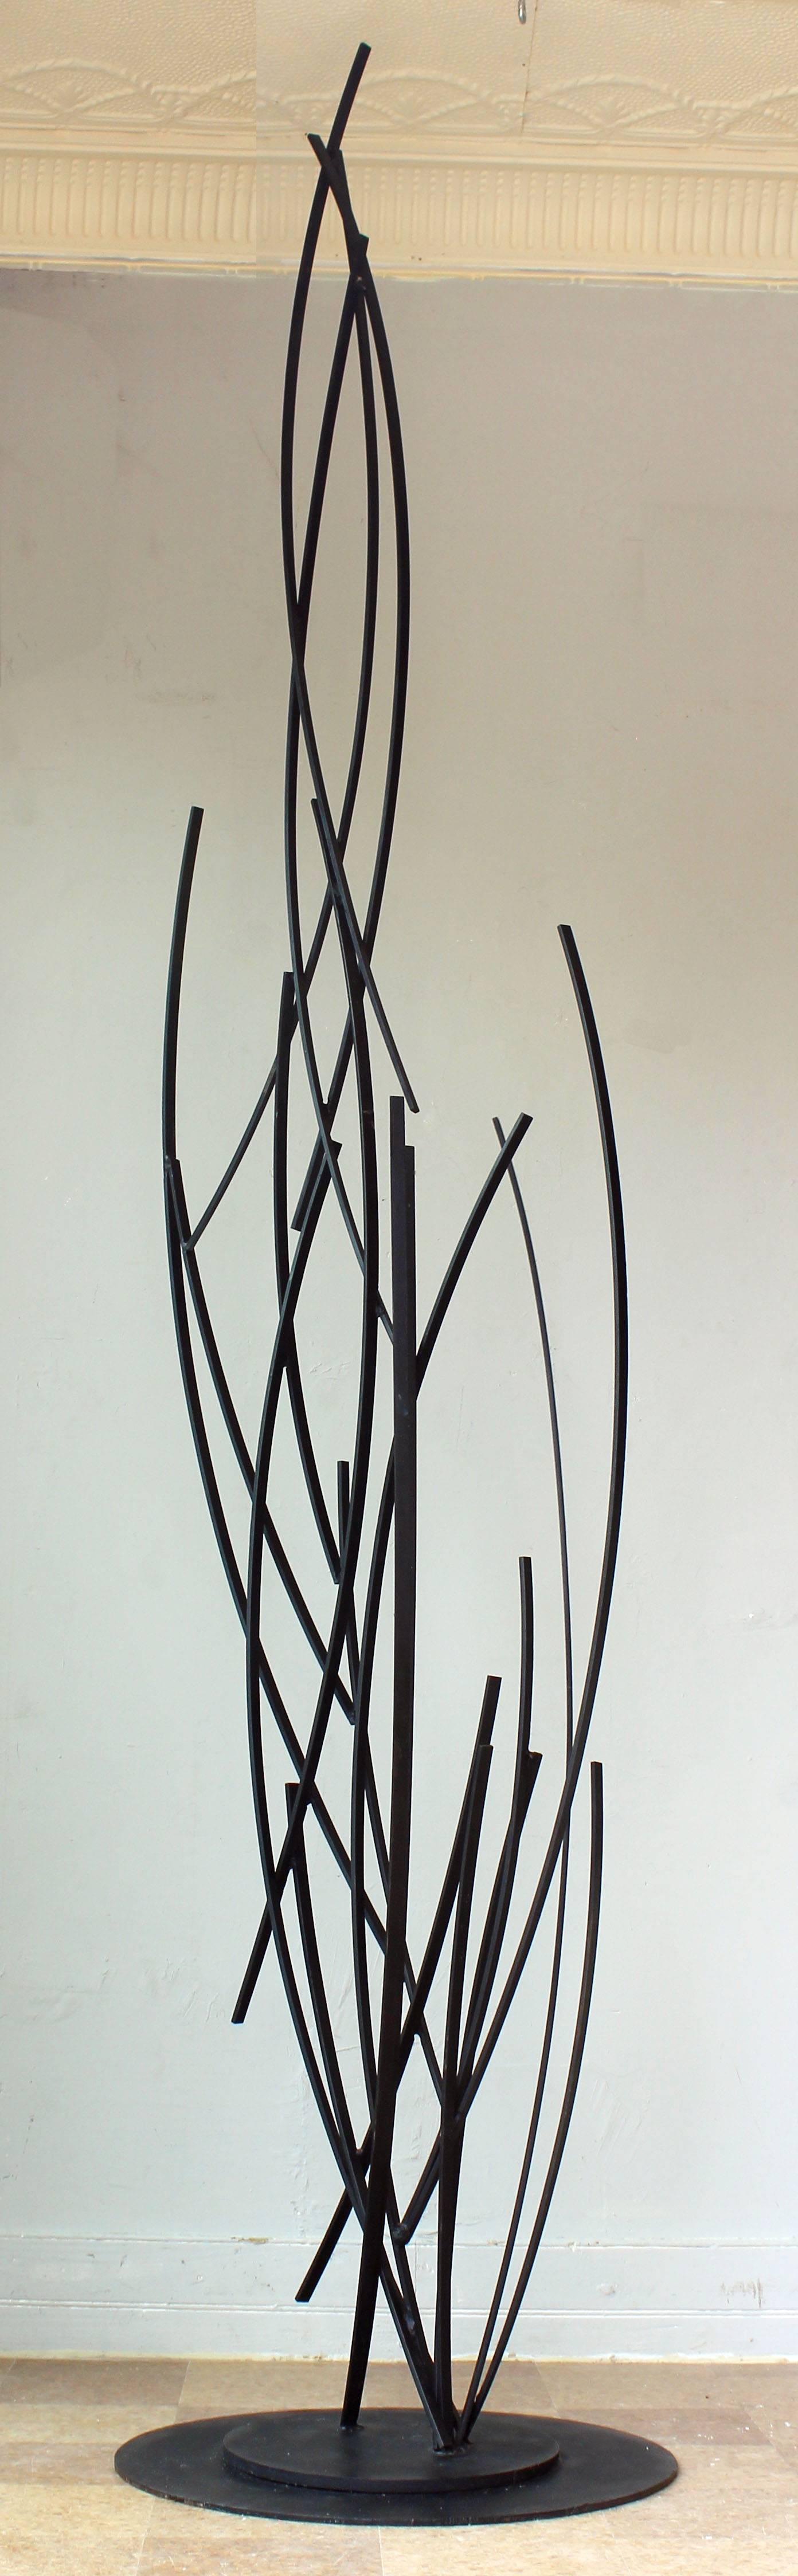 A 1970s American modern abstract iron sculpture, signed.

Measures: 24 inch diameter base.